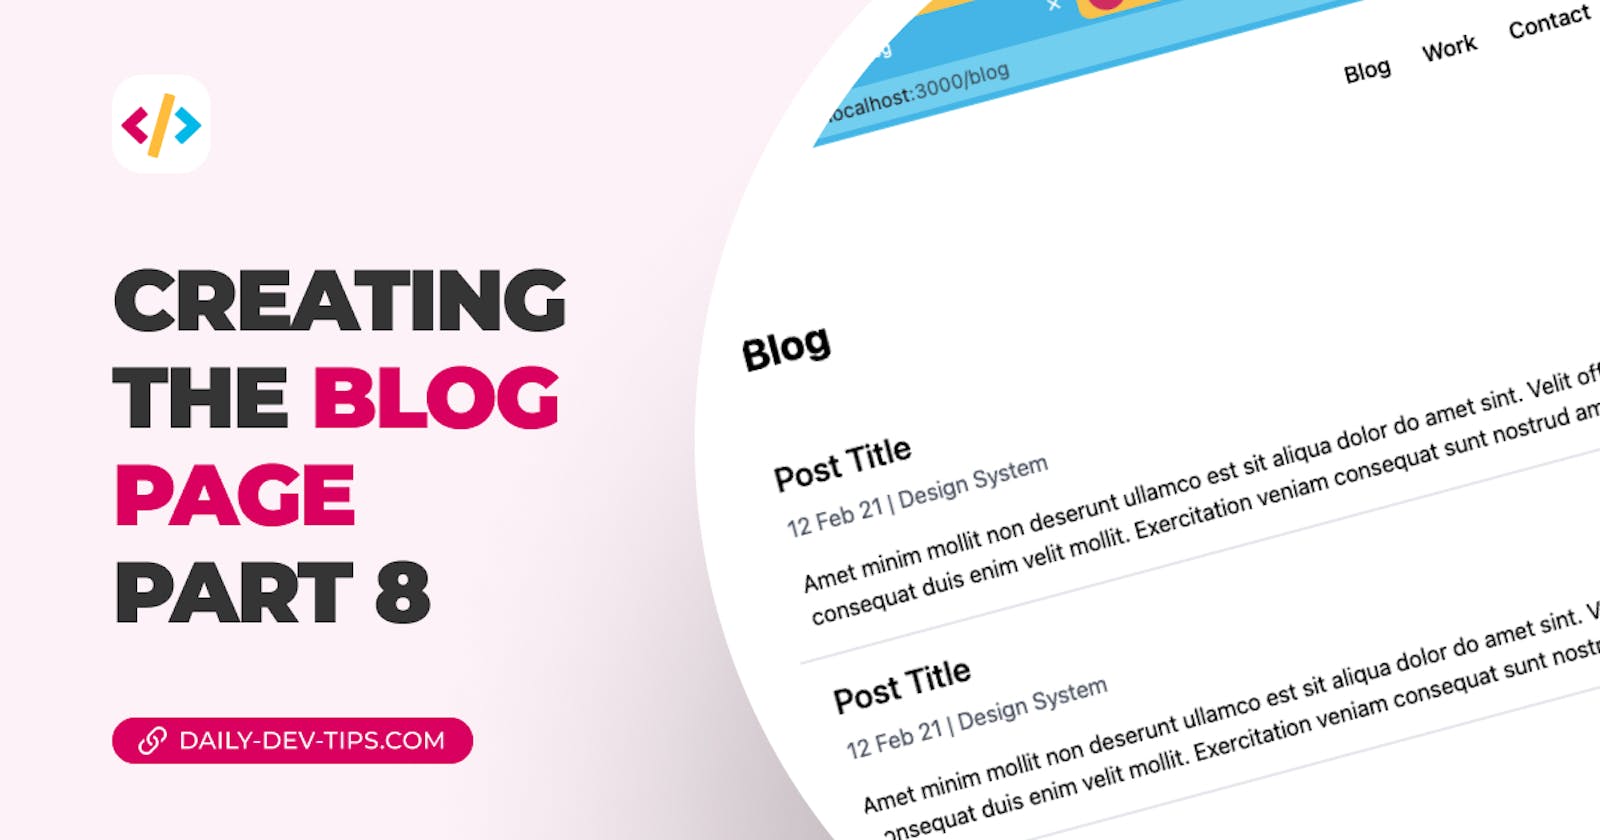 Creating the blog page - part 8